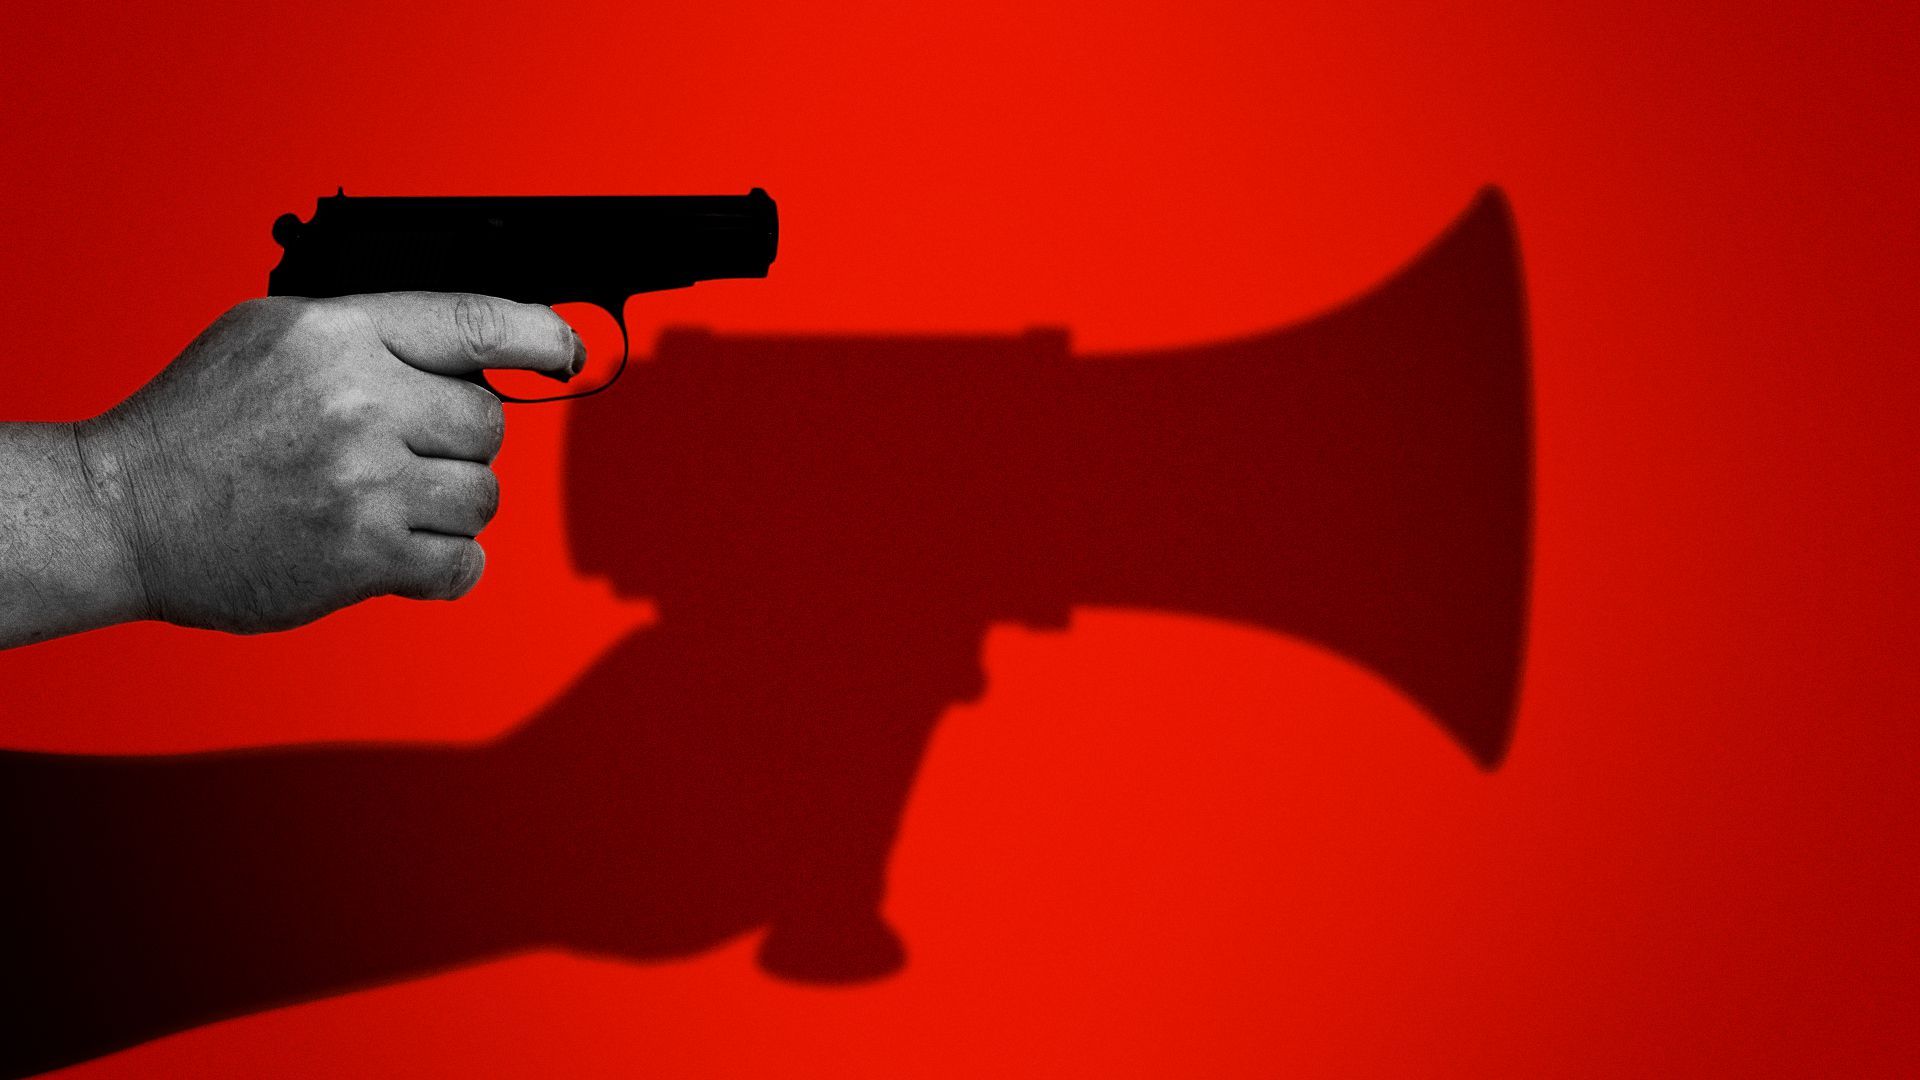 Illustration of a handgun casting the shadow of a bullhorn on a red background.